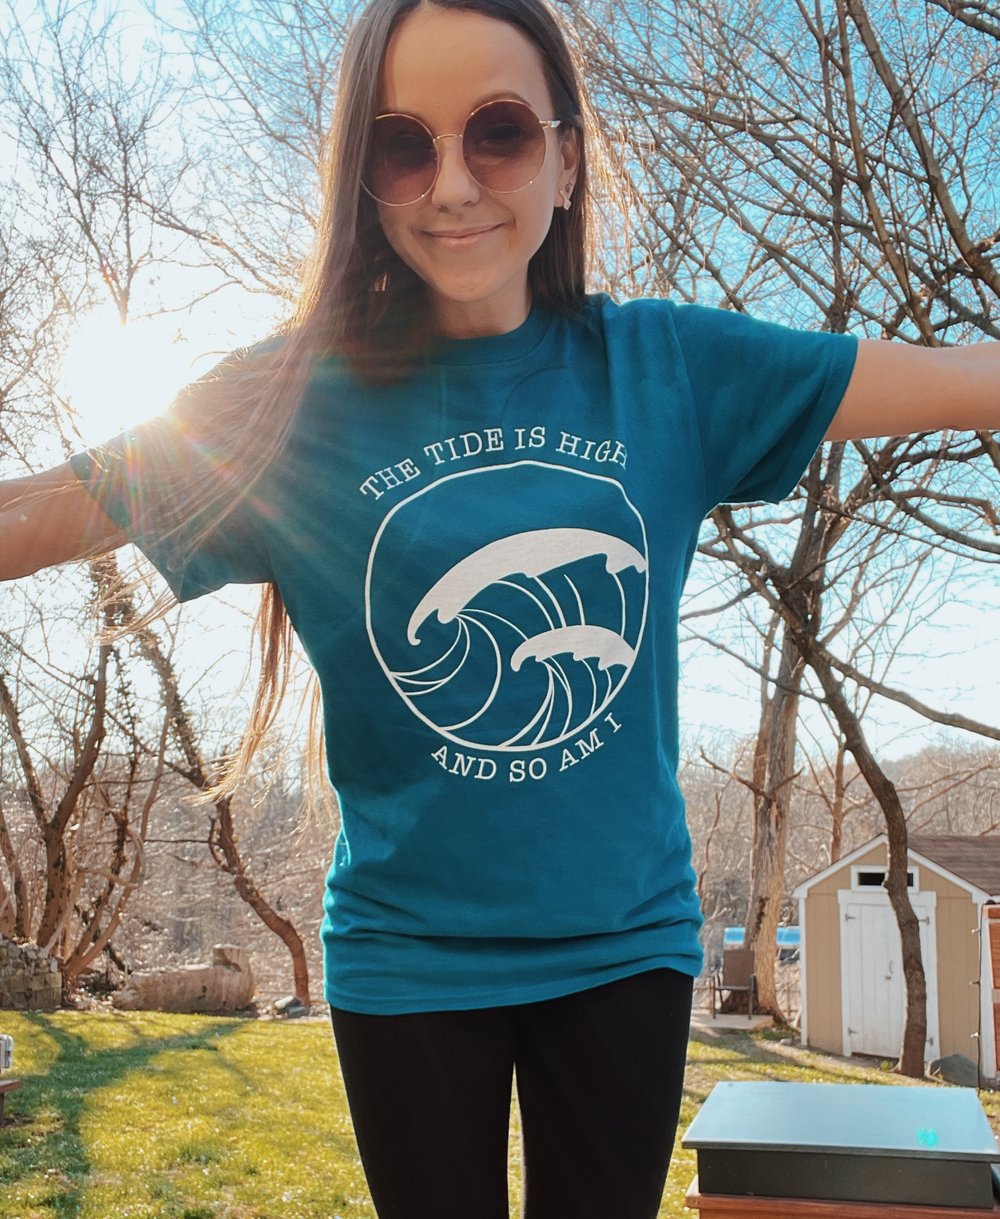 THE TIDE IS HIGH AND SO AM I - Galapagos blue t-shirt